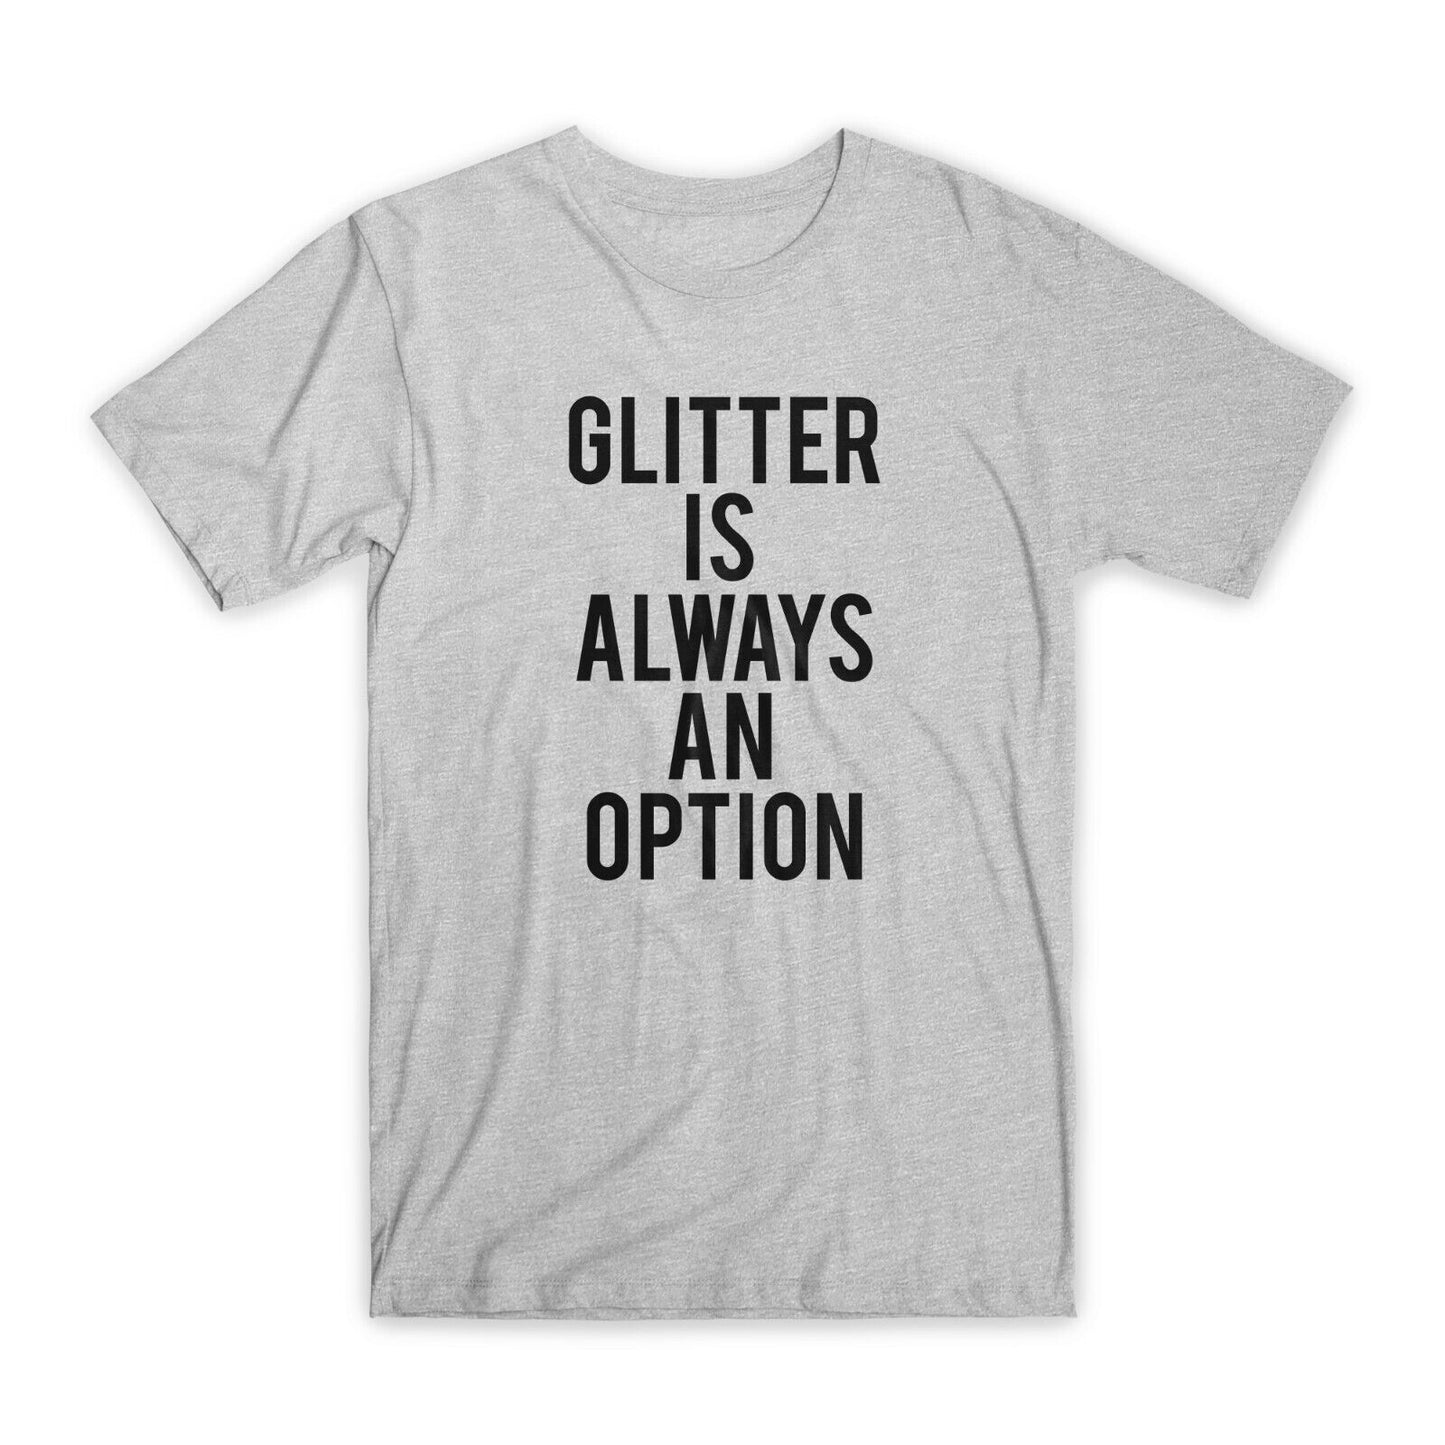 Glitter is Always an Option T-Shirt Premium Cotton Crew Neck Funny Tees Gift NEW